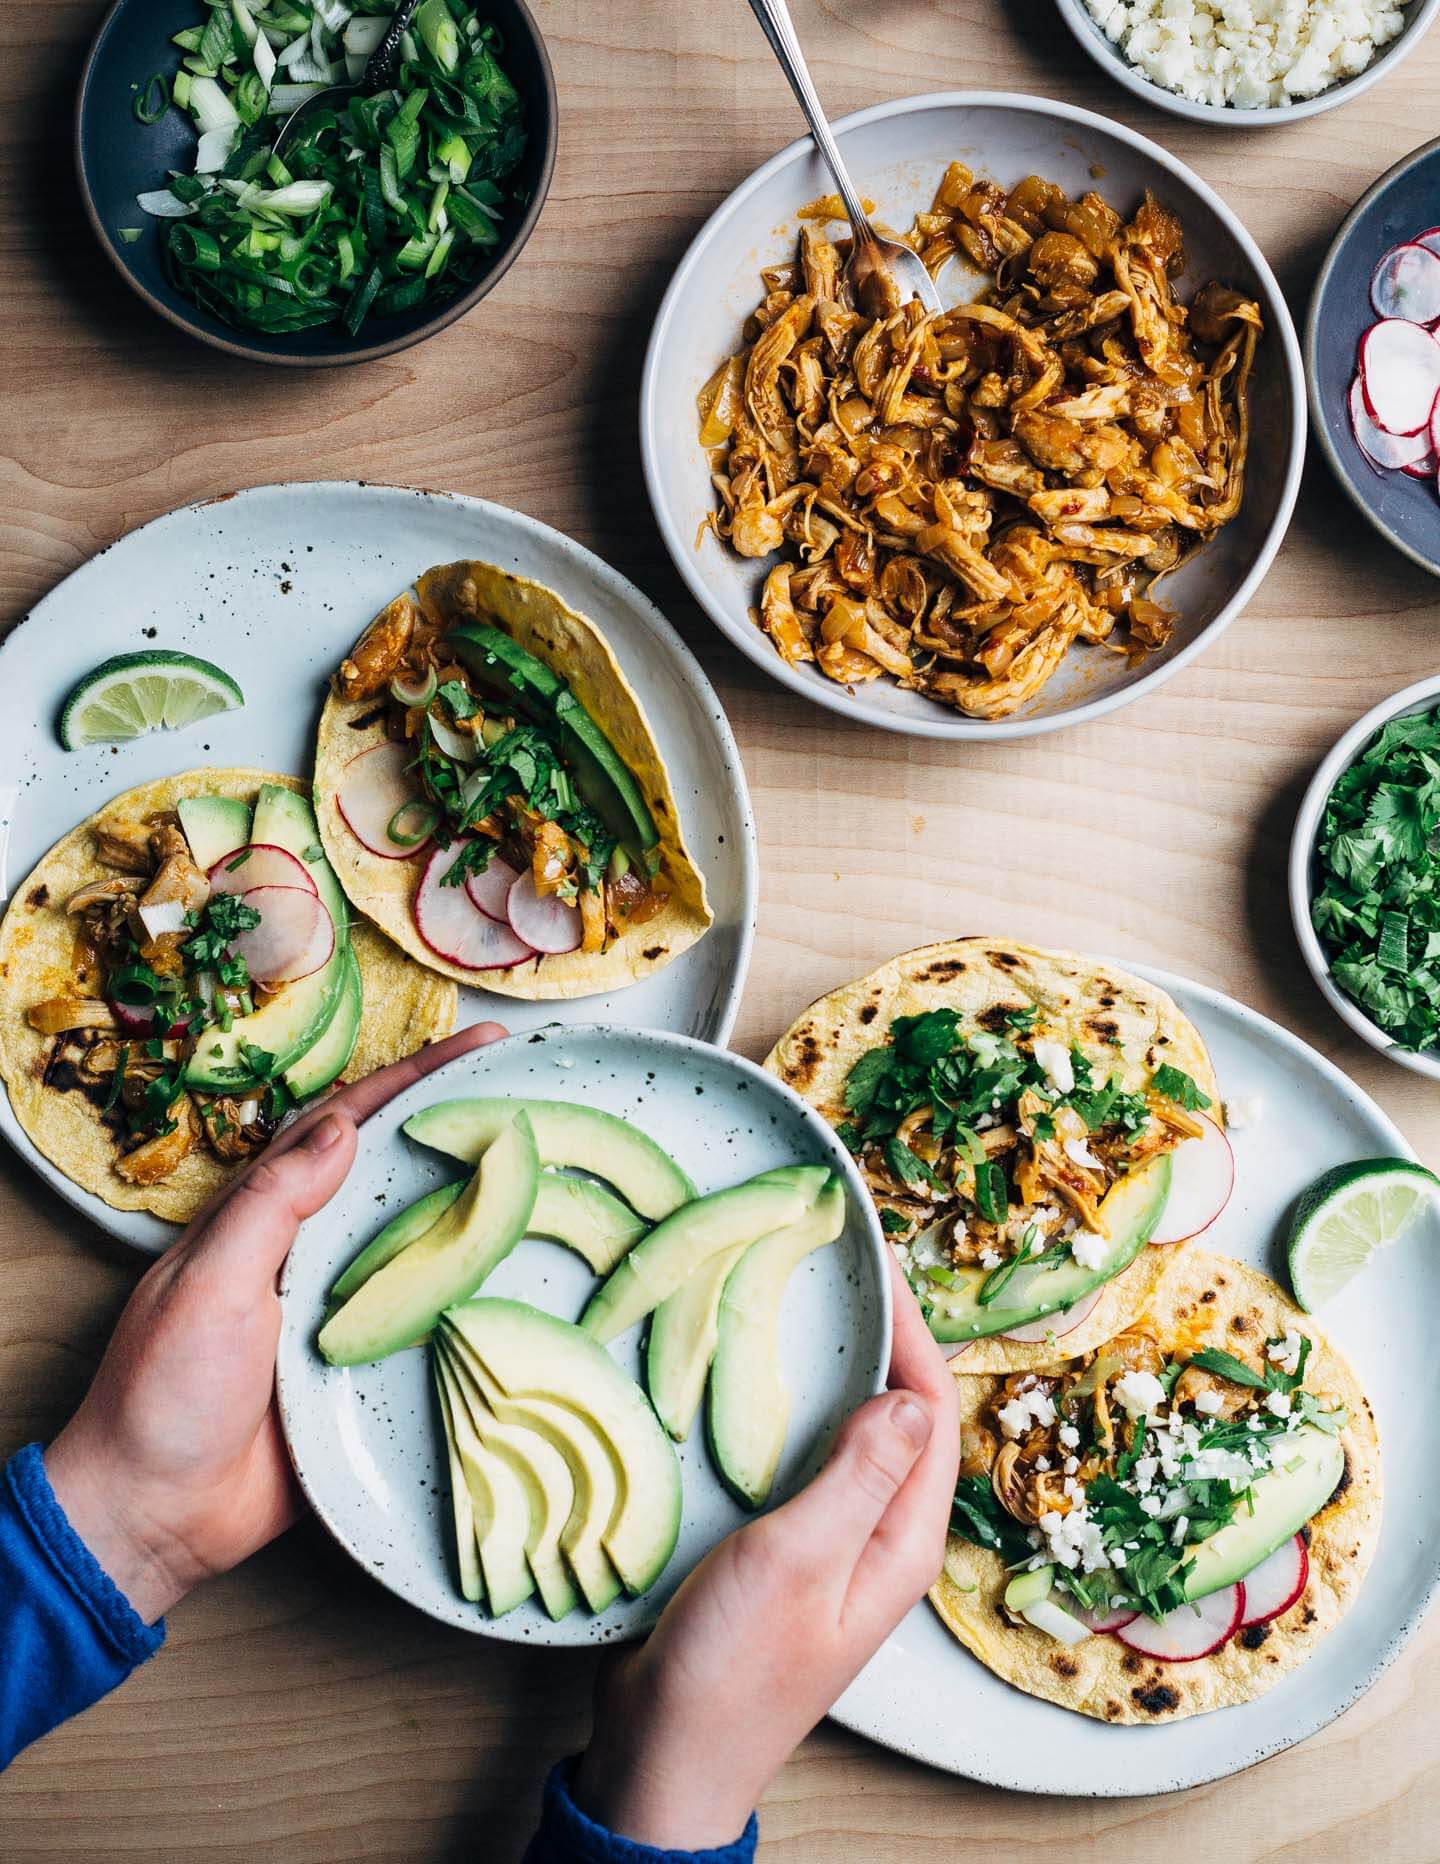 Chipotle chilies in adobo sauce lend smoky heat to these classic chicken tacos topped with avocado, radish, cilantro, and crumbled cotija. This post was created in partnership with SVO Farmer Focus Chicken. 